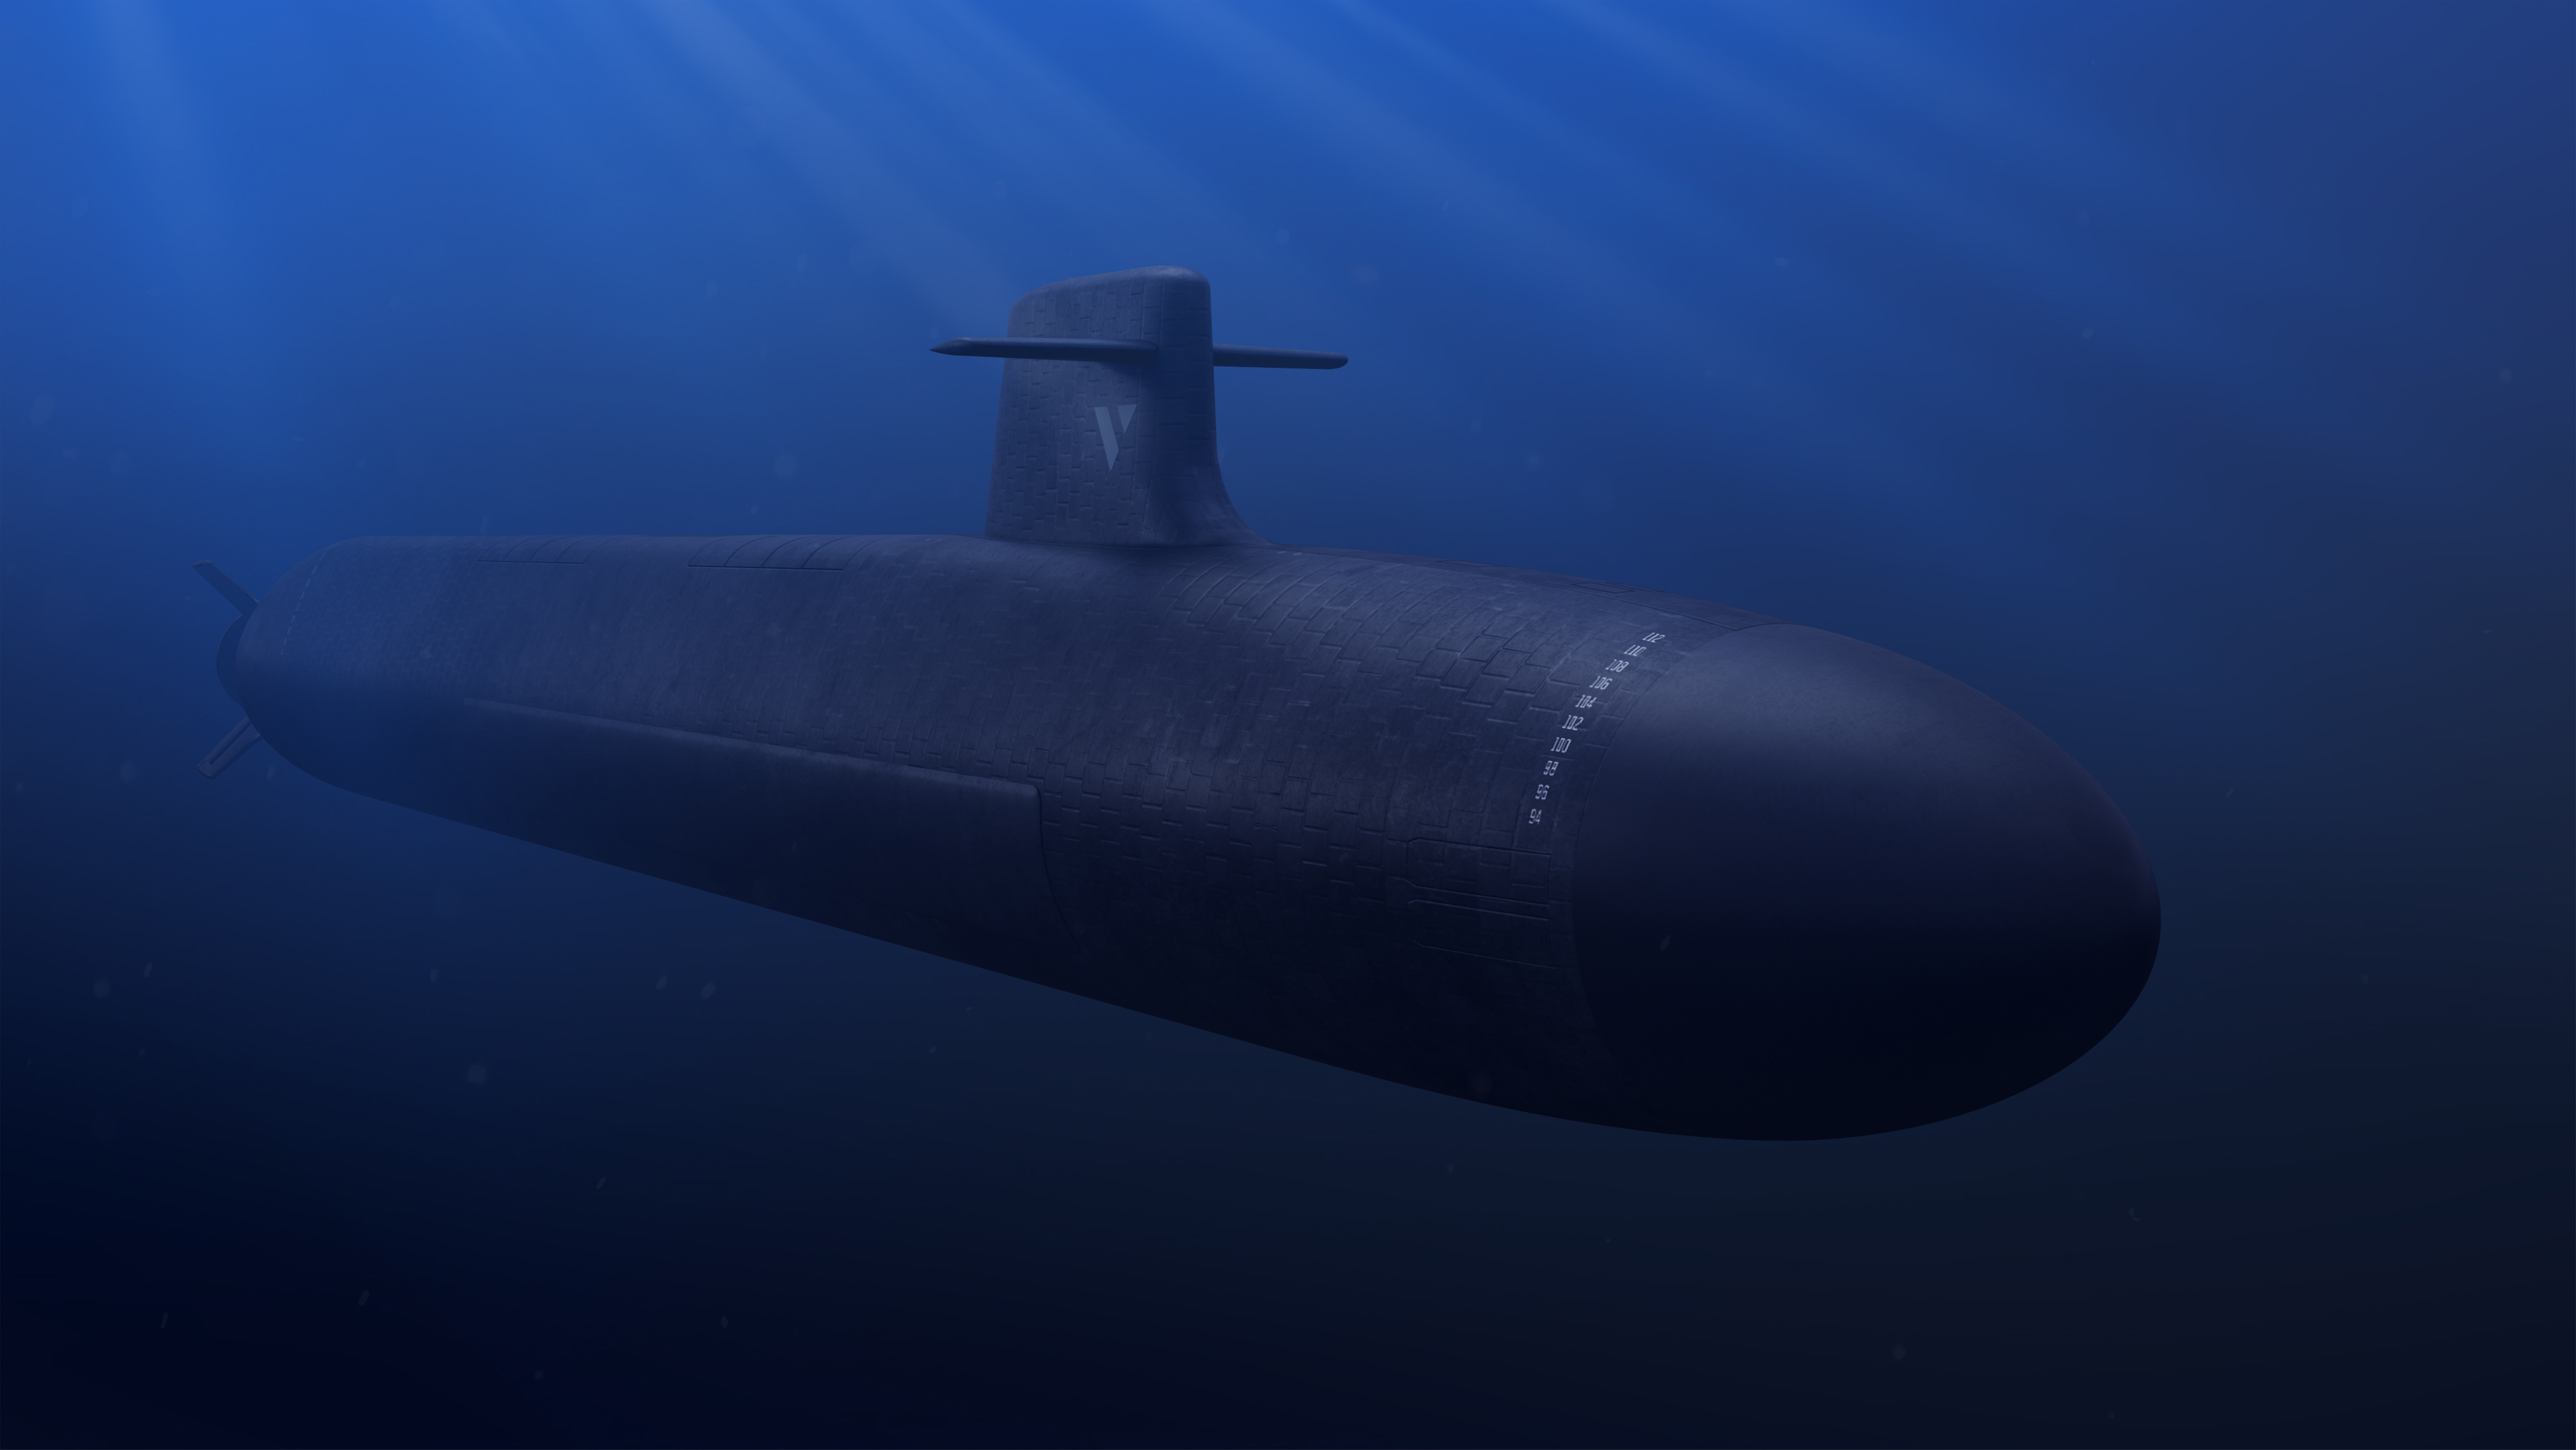 France Navy's third-generation nuclear-powered ballistic-missile submarines (SSBNs)